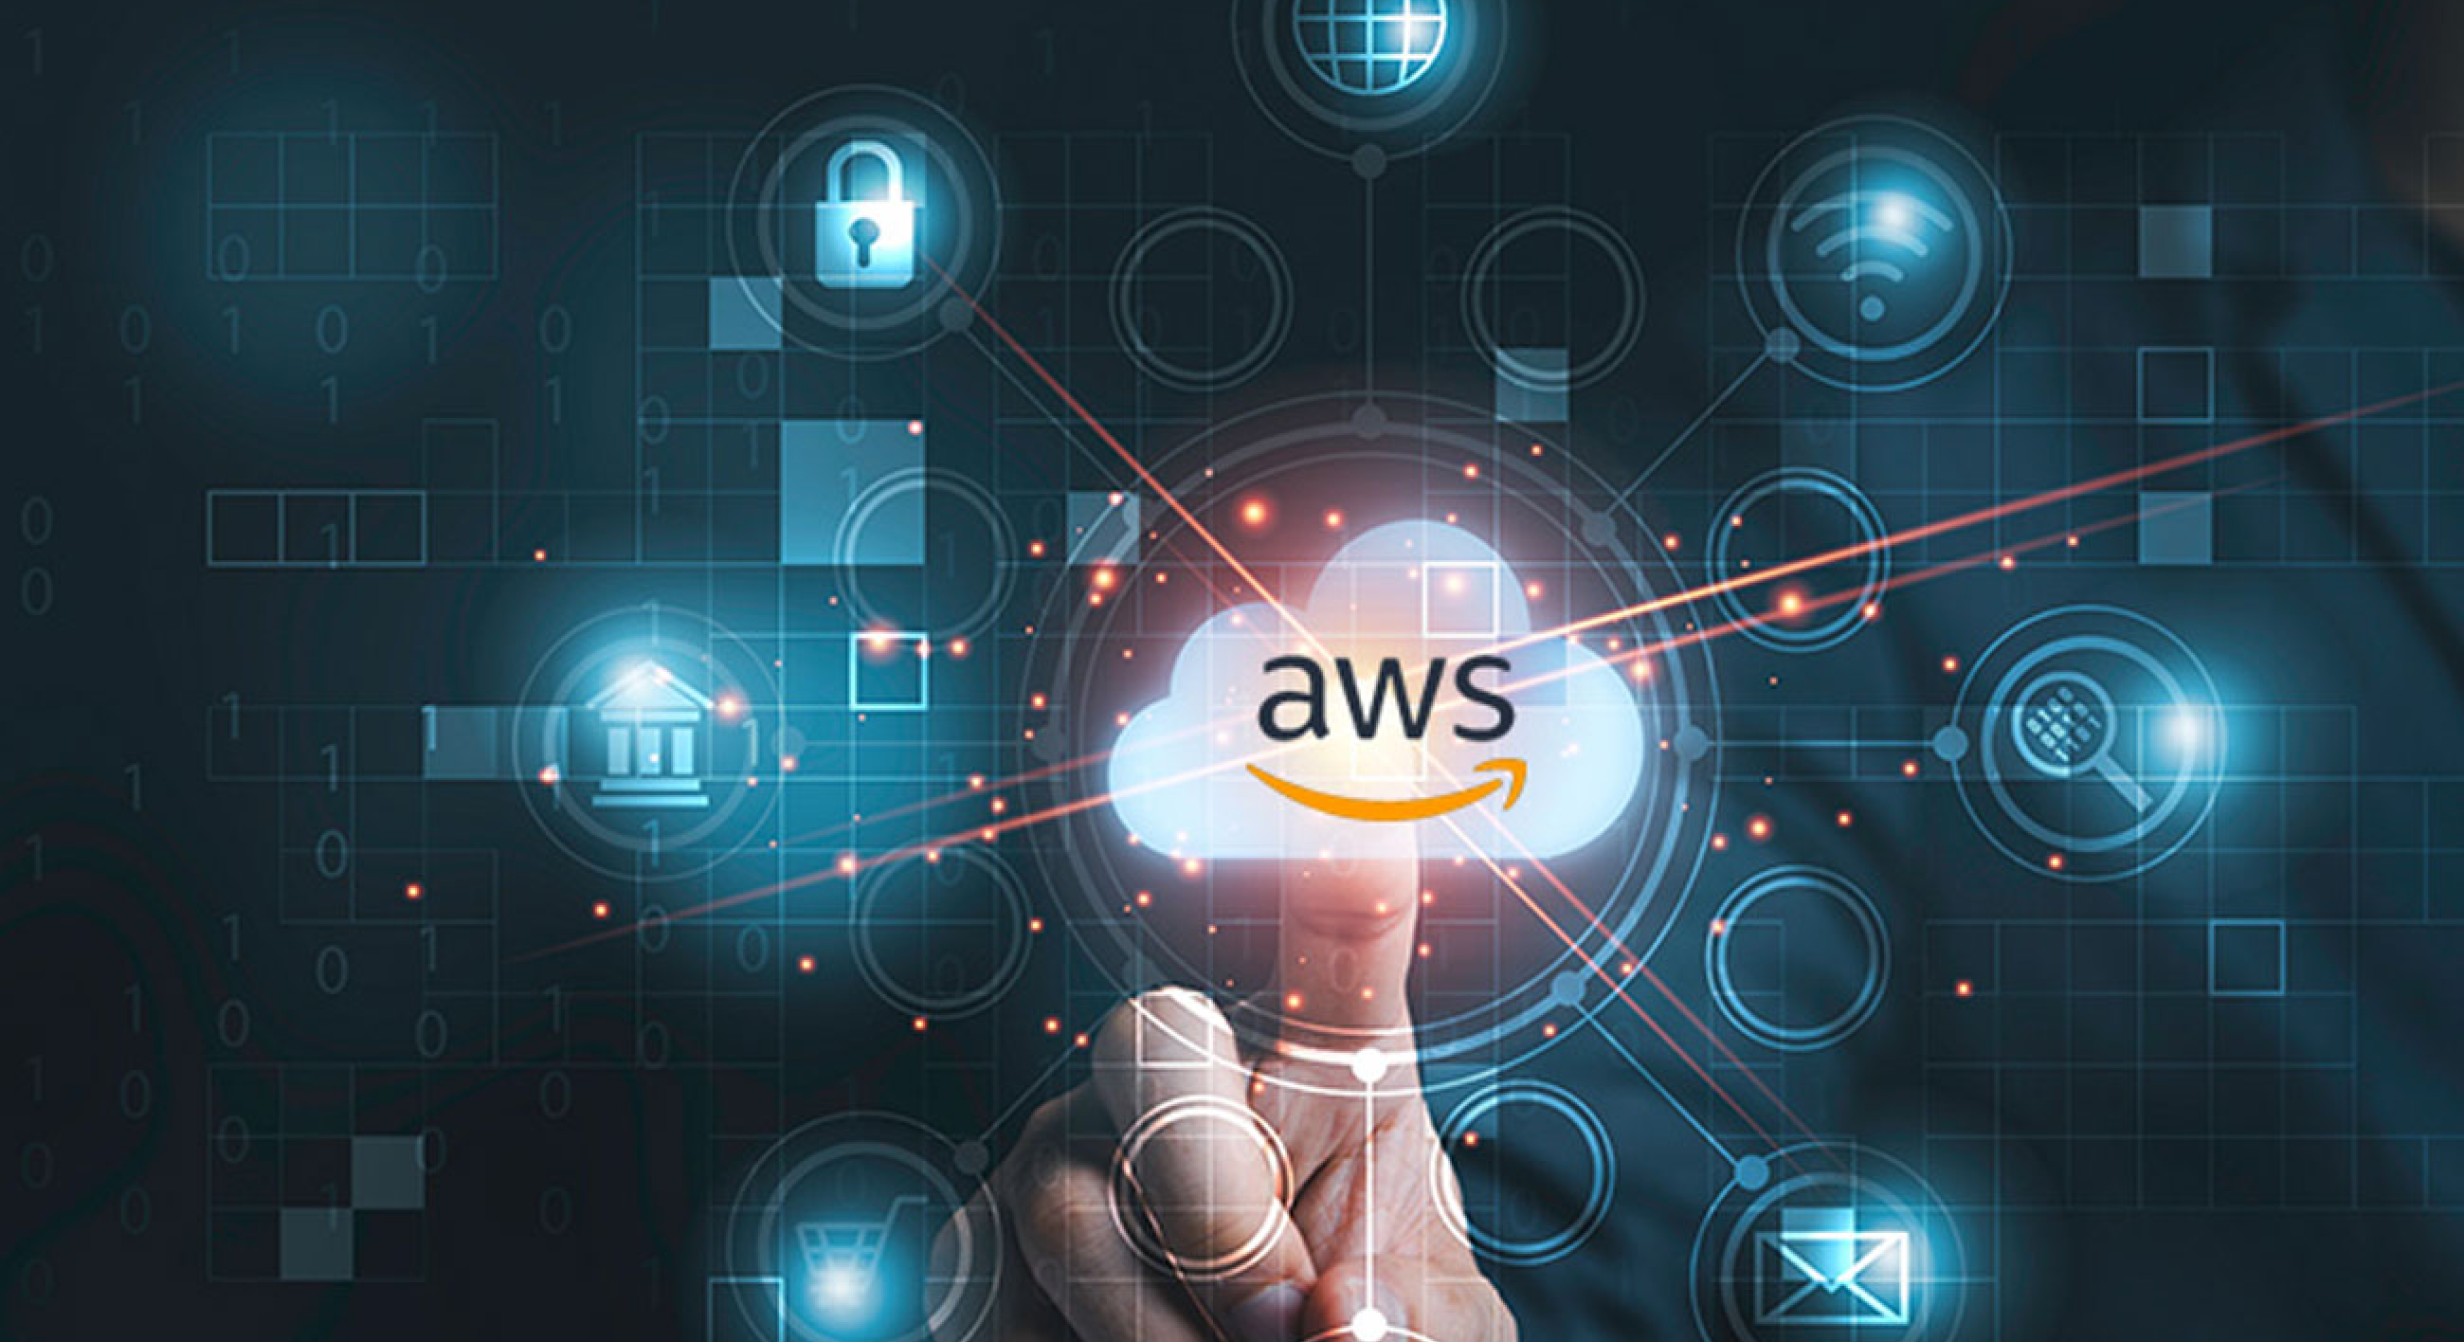 New Apprenticeship to Launch New AWS Cloud Apprenticeship